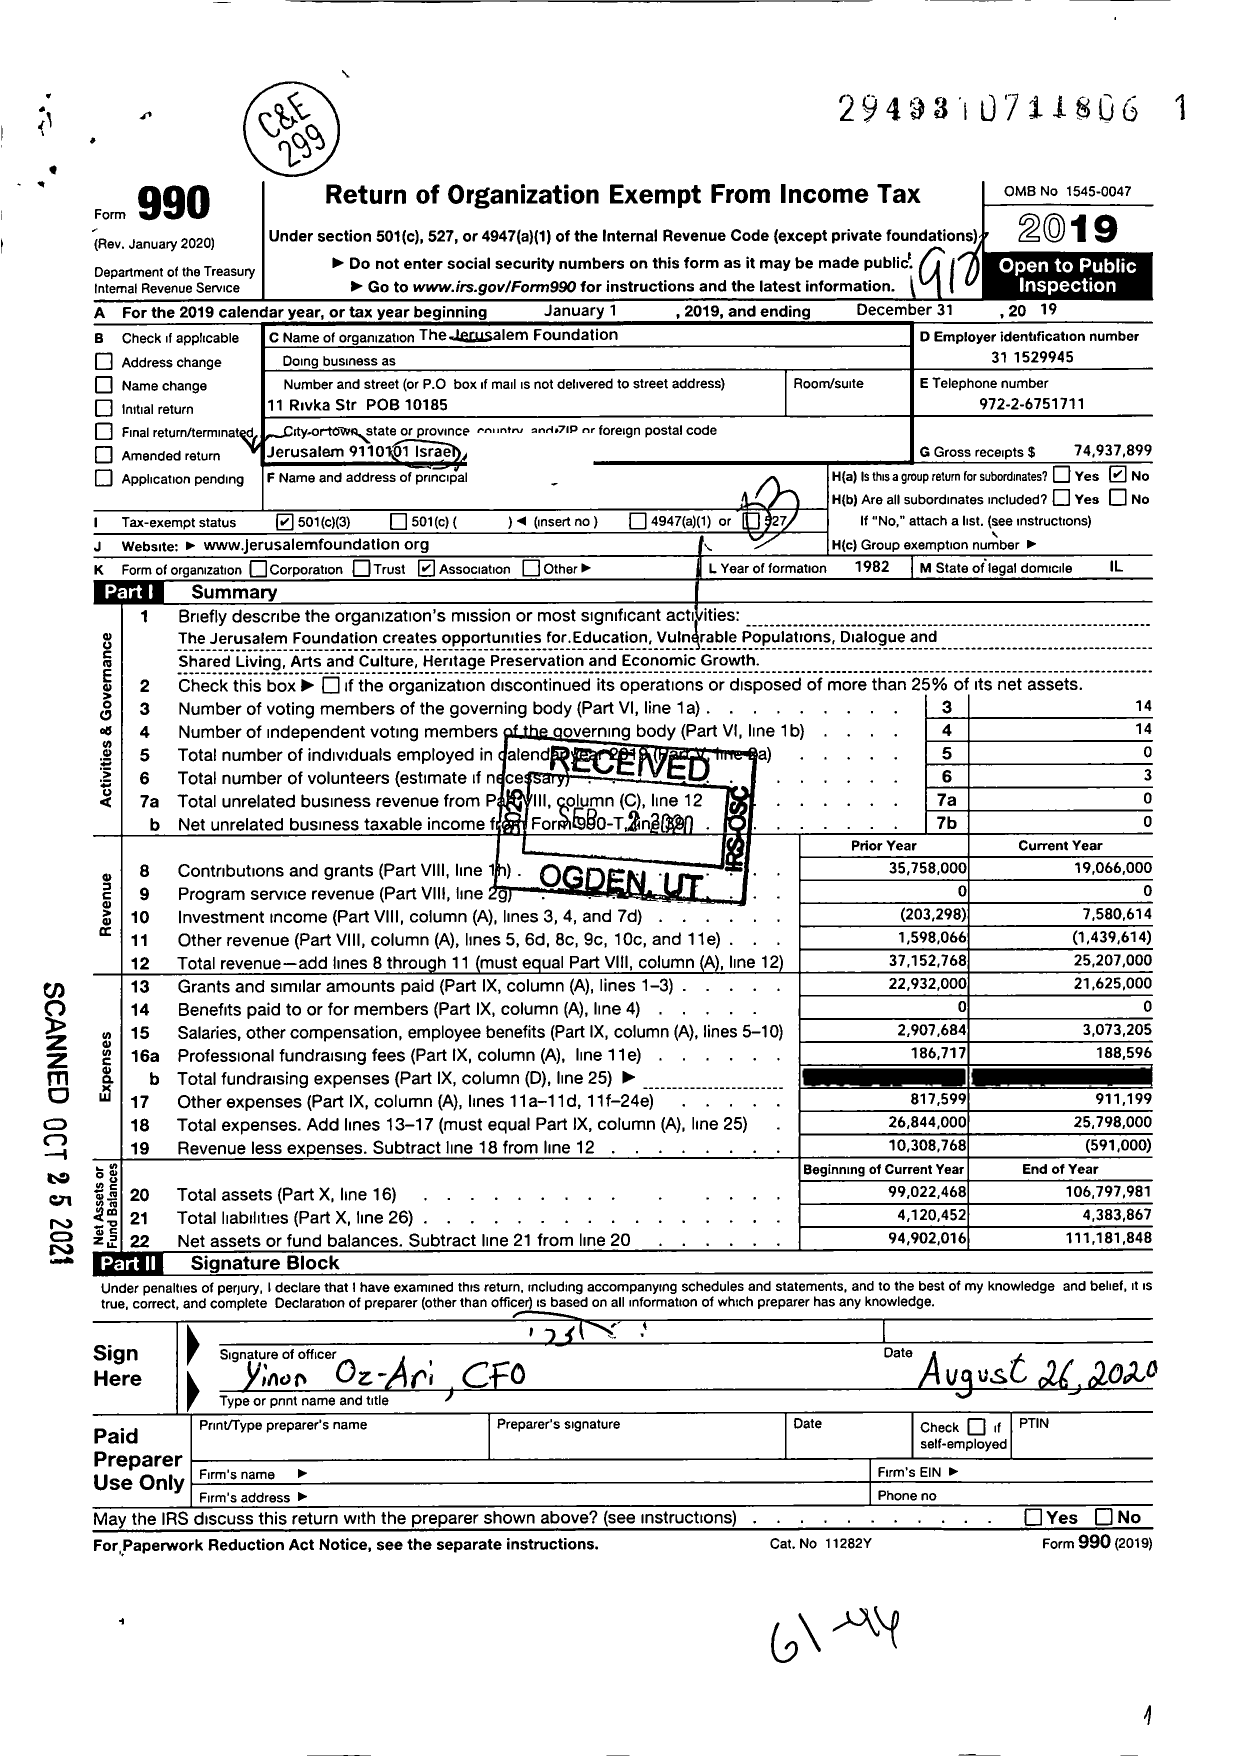 Image of first page of 2019 Form 990 for The Jerusalem Foundation